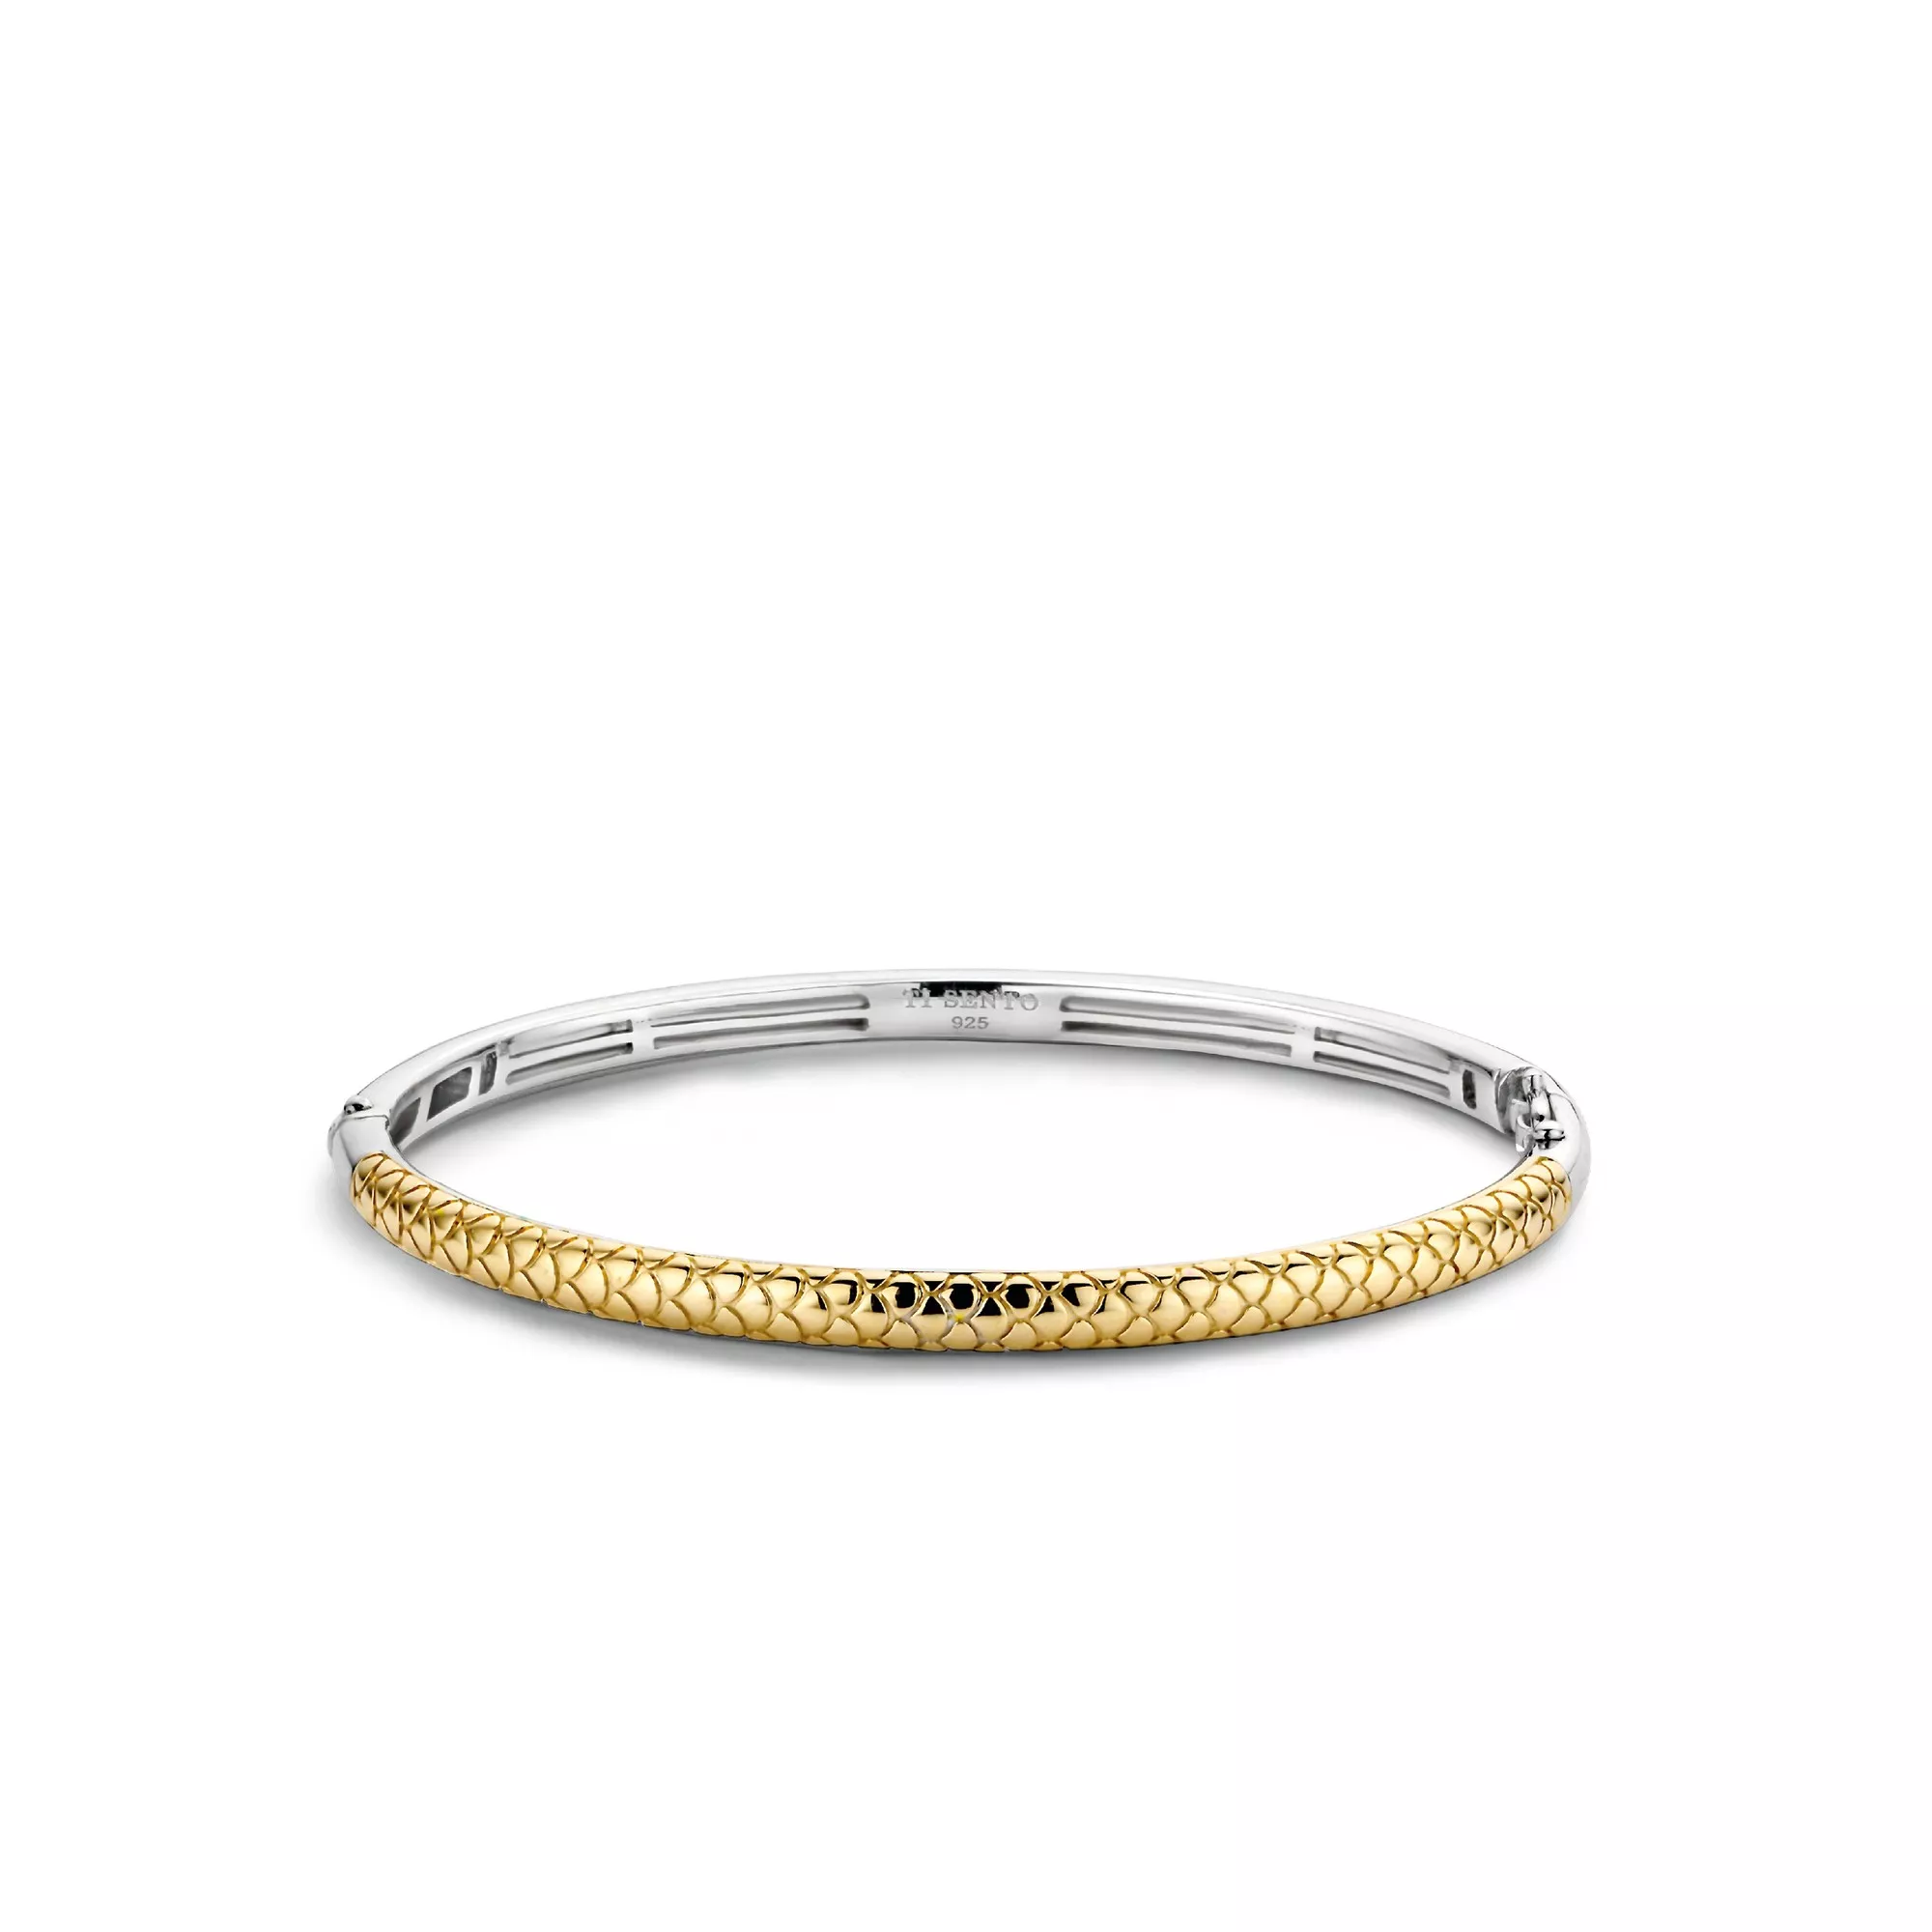 TI SENTO - Milano Armband 2945SY Zilver gold plated 50 x 60 mm